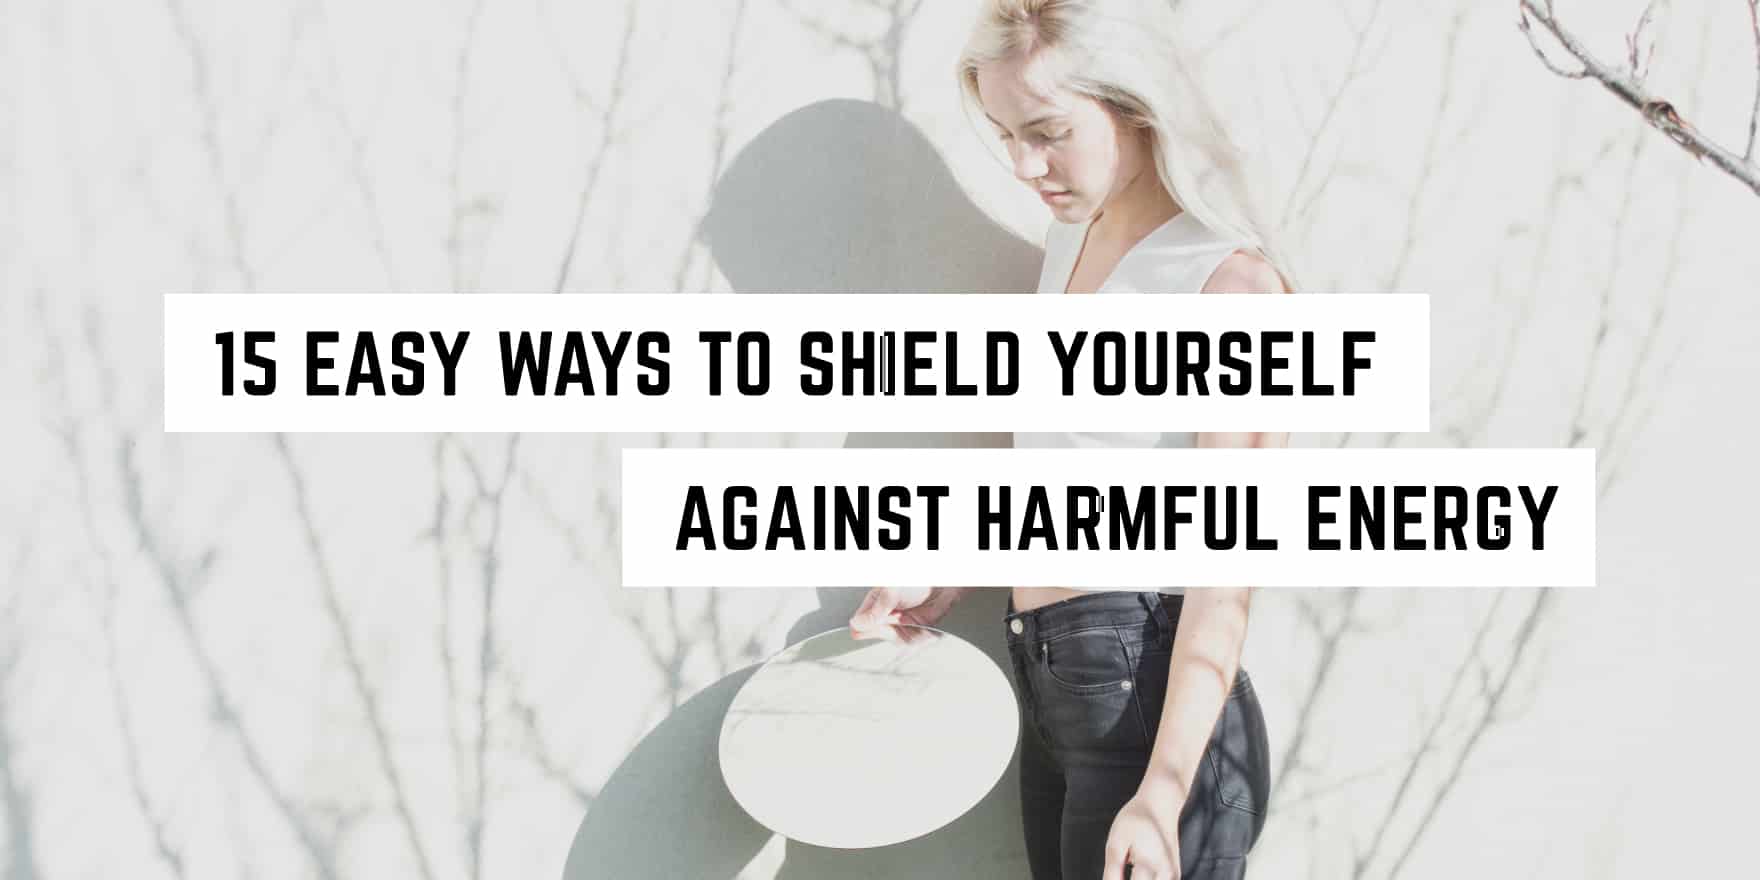 A thoughtful young woman holding a shield with text overlay "15 easy ways to shield yourself against harmful energy with witchy wisdom.